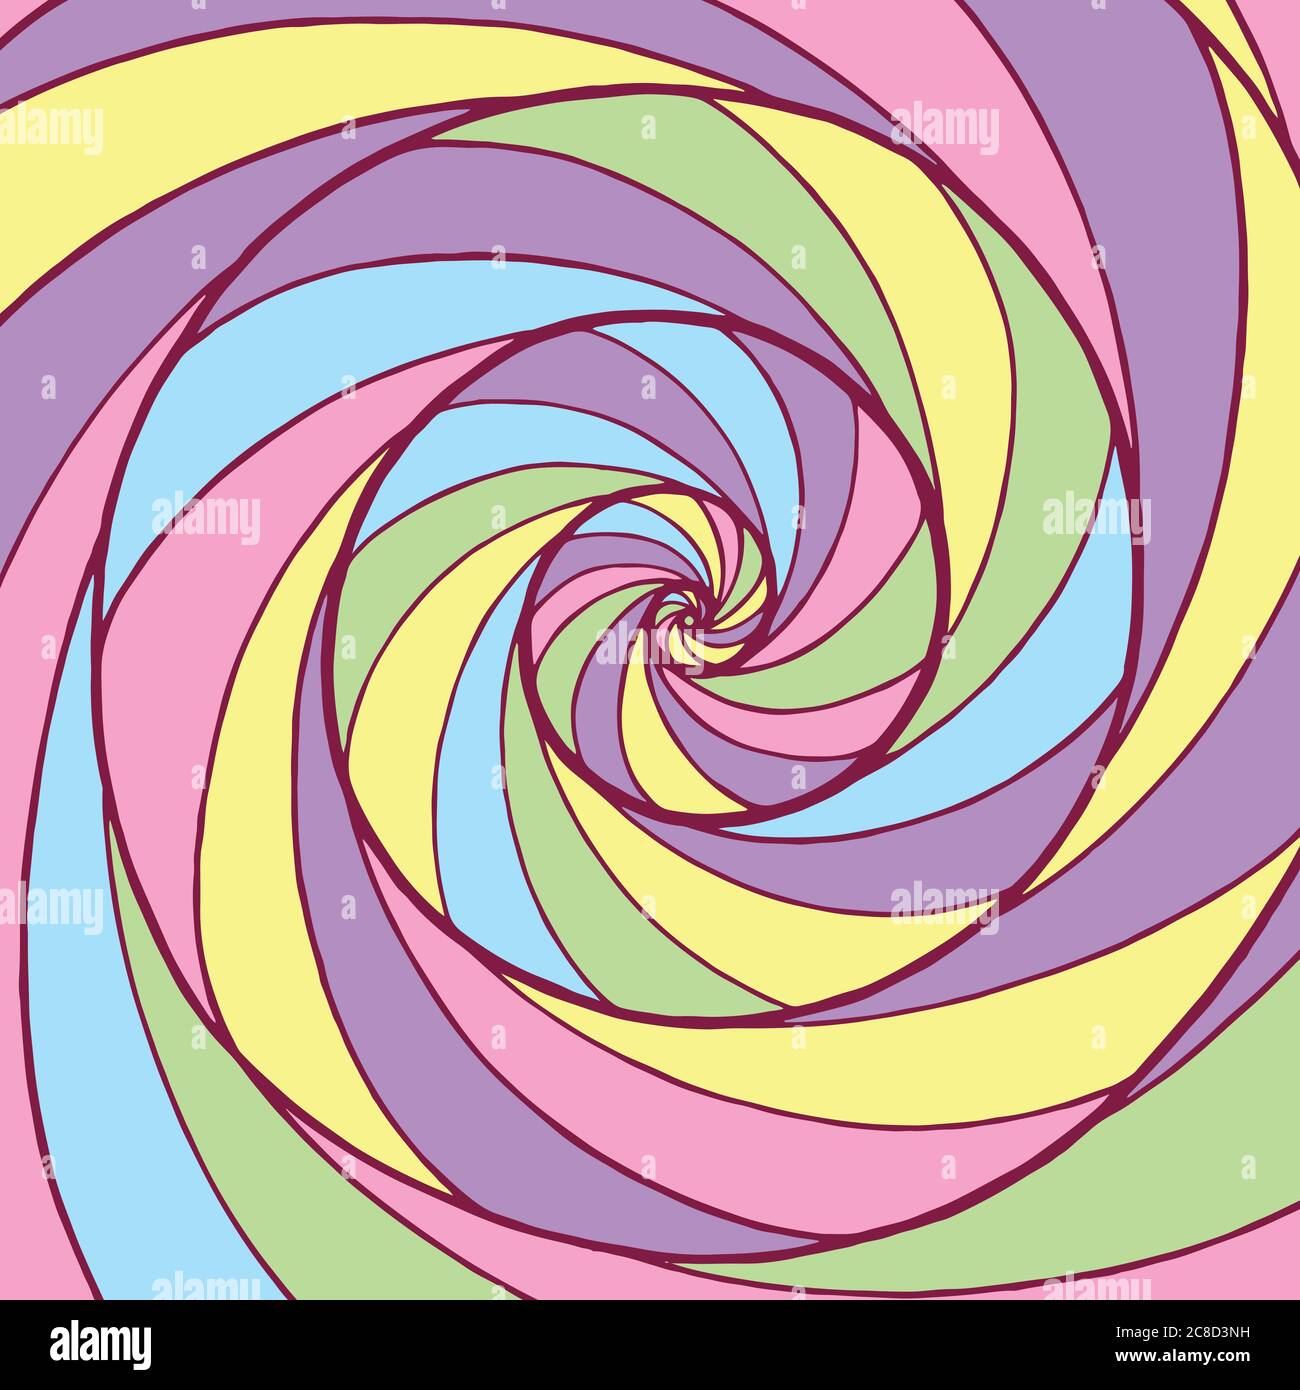 Whirl spiral pattern. Colorful psychedelic graphic art. Ornamental trippy backdrop. Vector illustration. Stock Vector